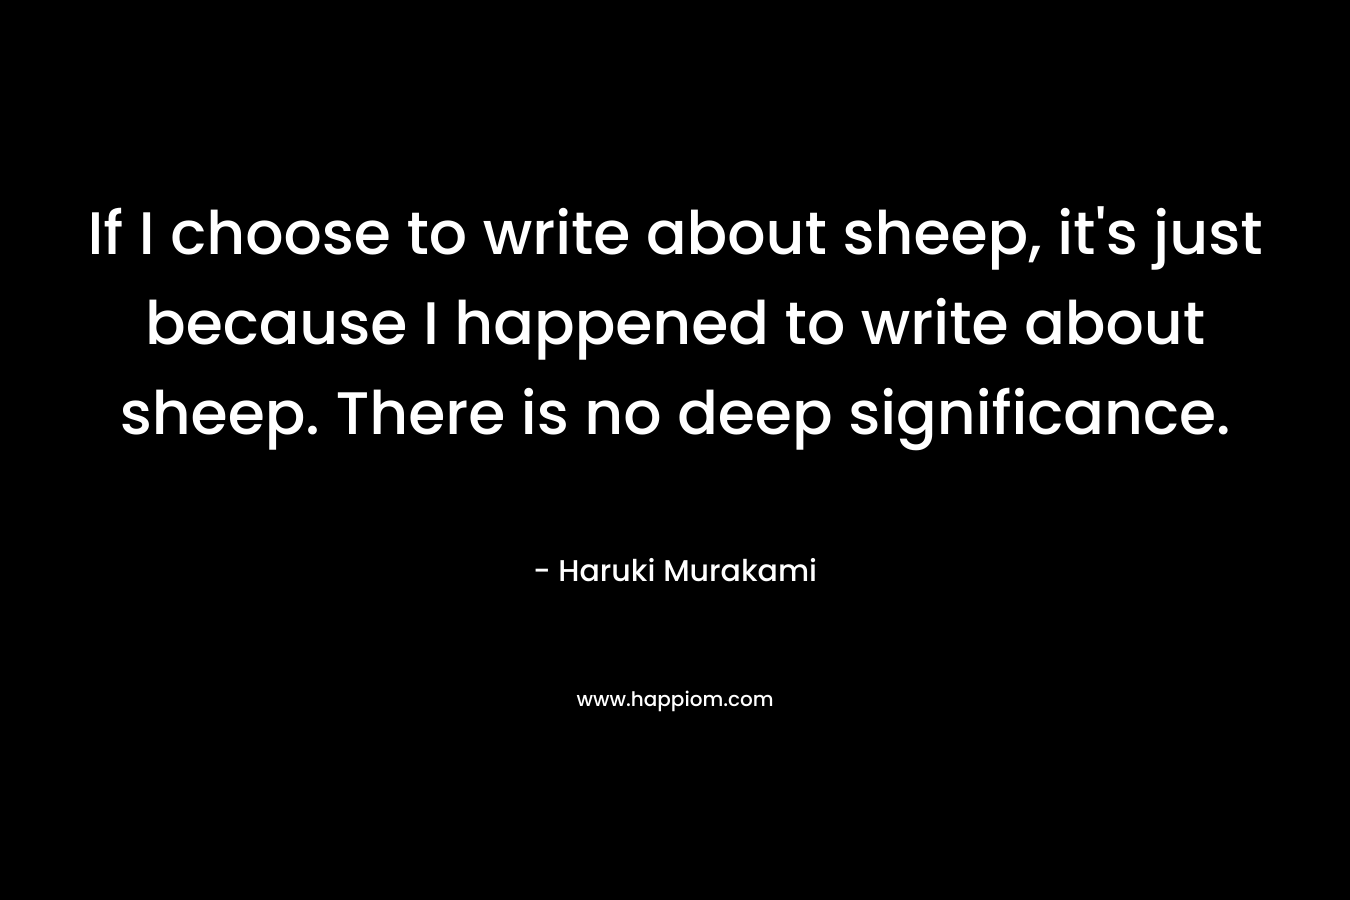 If I choose to write about sheep, it’s just because I happened to write about sheep. There is no deep significance. – Haruki Murakami